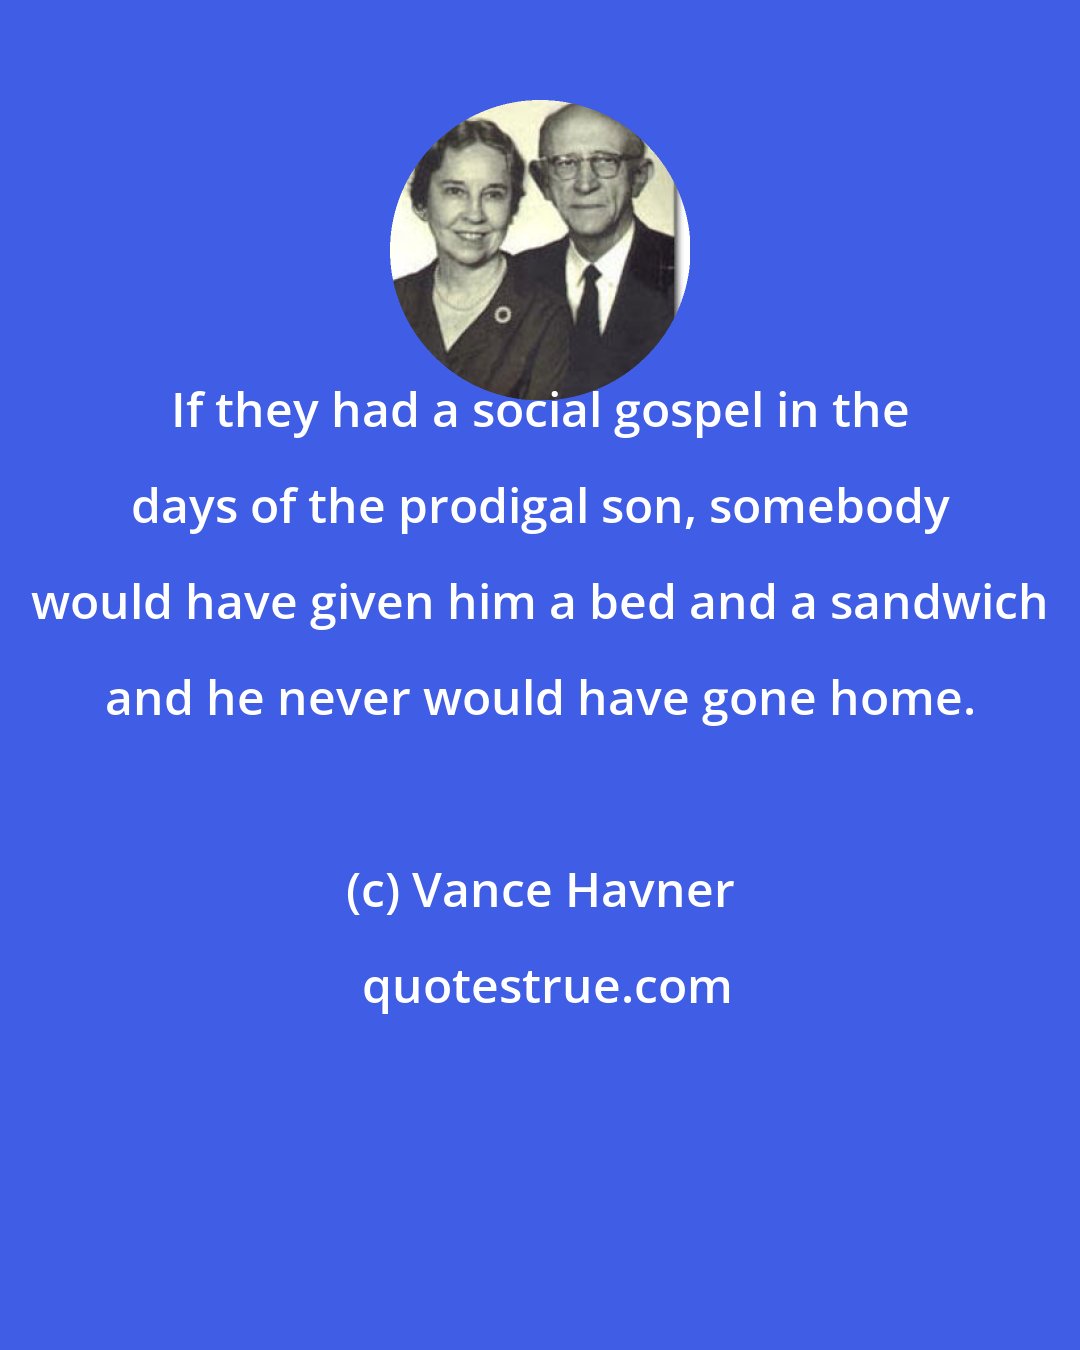 Vance Havner: If they had a social gospel in the days of the prodigal son, somebody would have given him a bed and a sandwich and he never would have gone home.